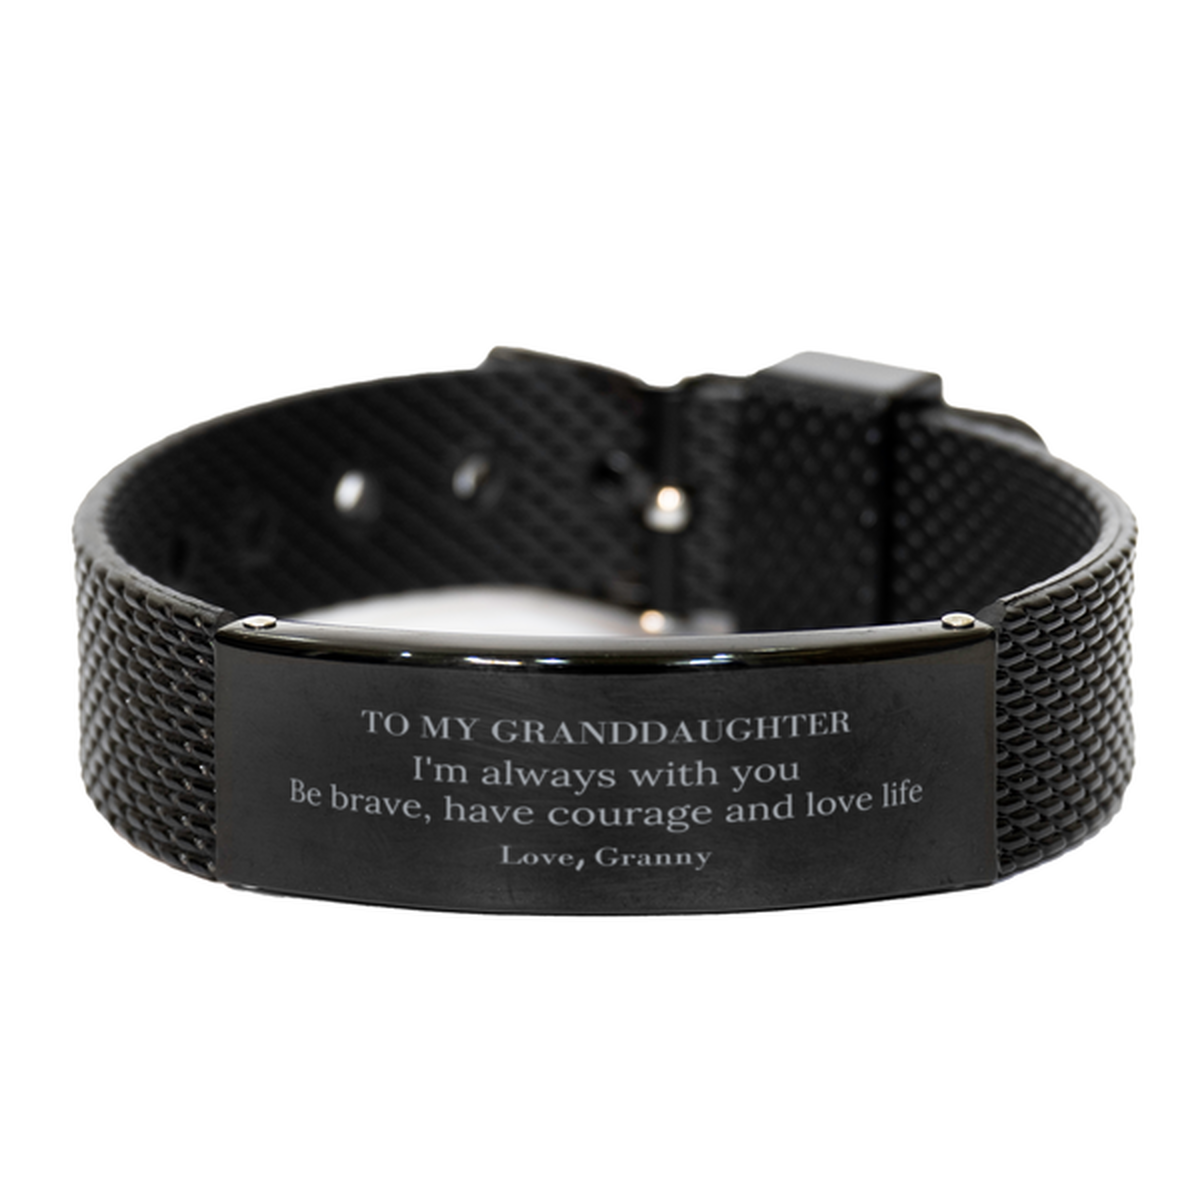 To My Granddaughter Gifts from Granny, Unique Black Shark Mesh Bracelet Inspirational Christmas Birthday Graduation Gifts for Granddaughter I'm always with you. Be brave, have courage and love life. Love, Granny